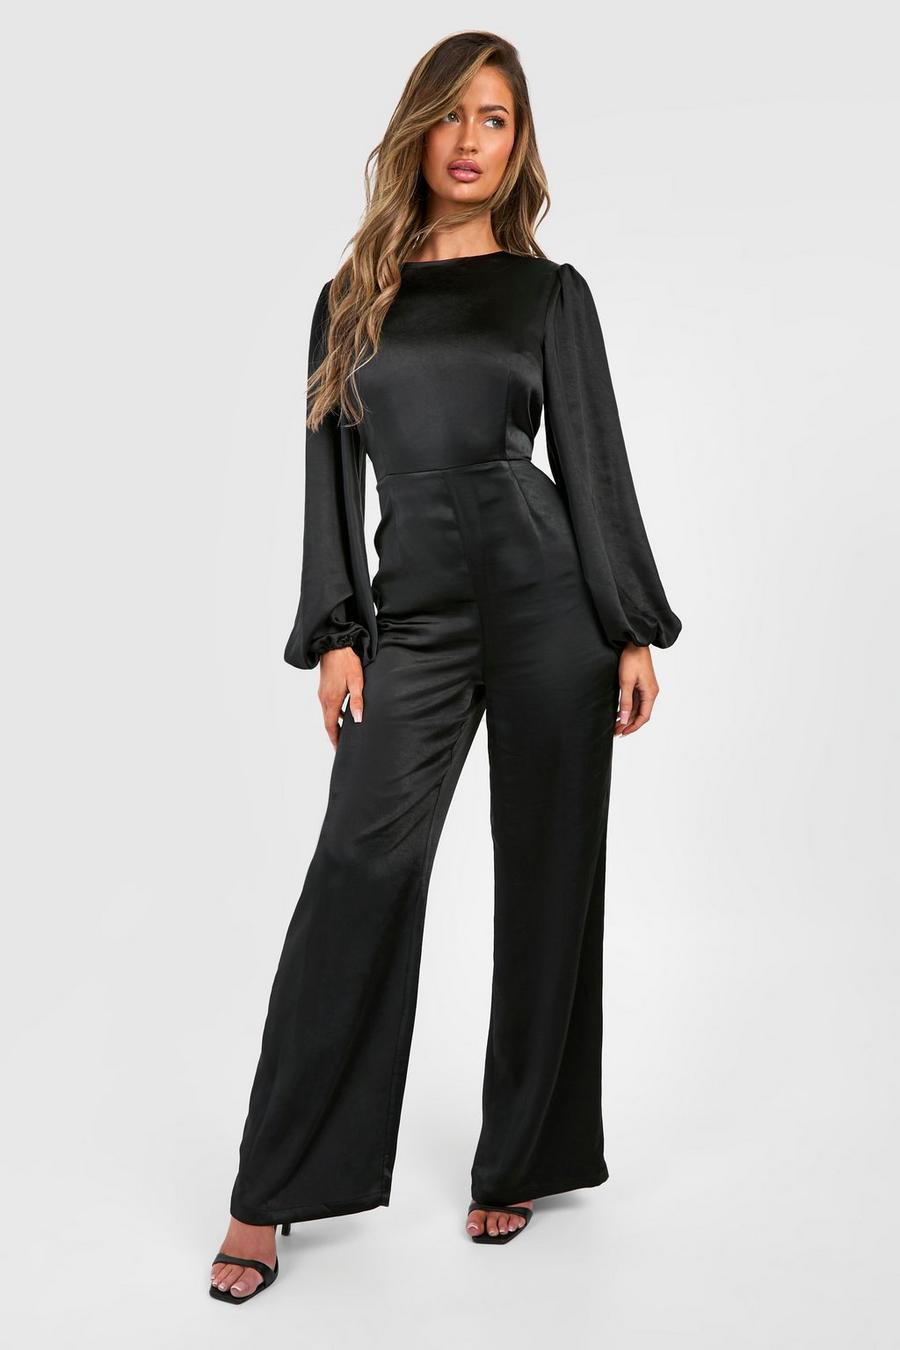 Jumpsuits & Rompers, Women's Jumpsuits and Rompers